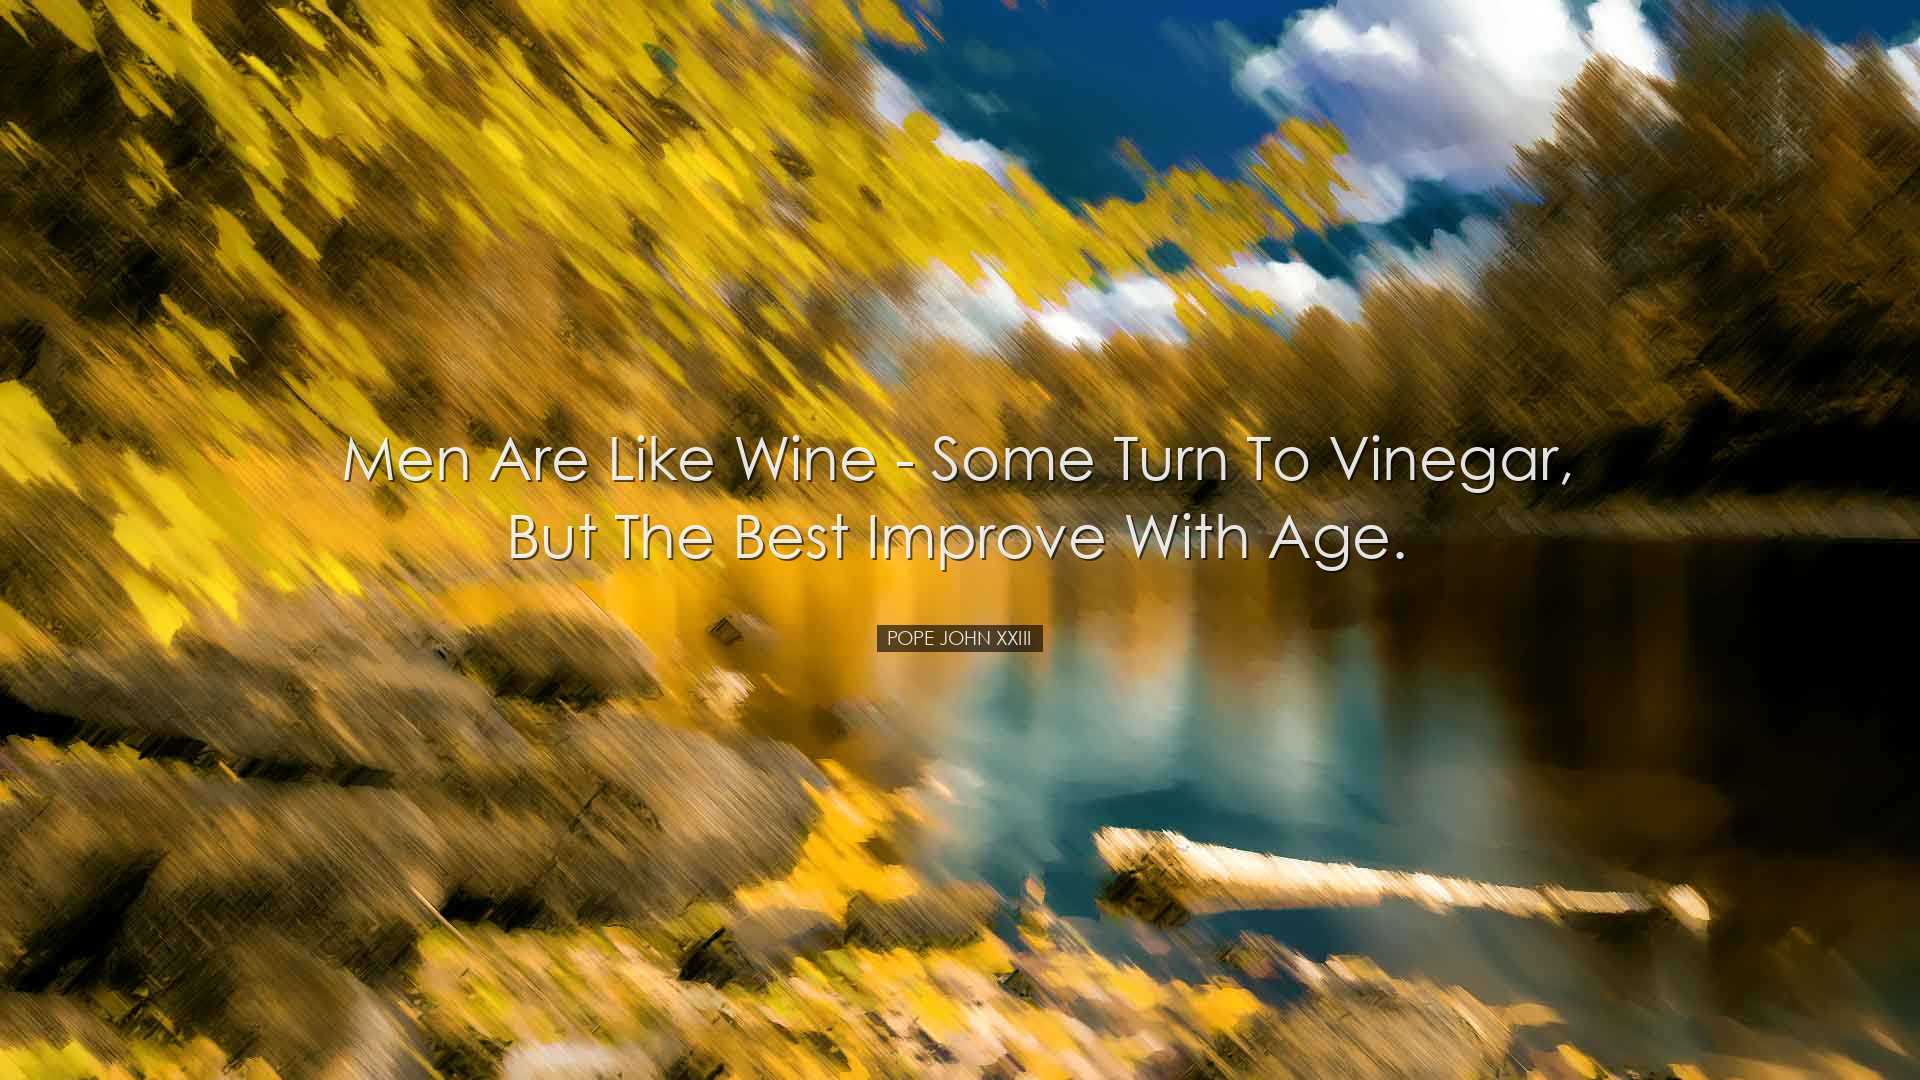 Men are like wine - some turn to vinegar, but the best improve wit